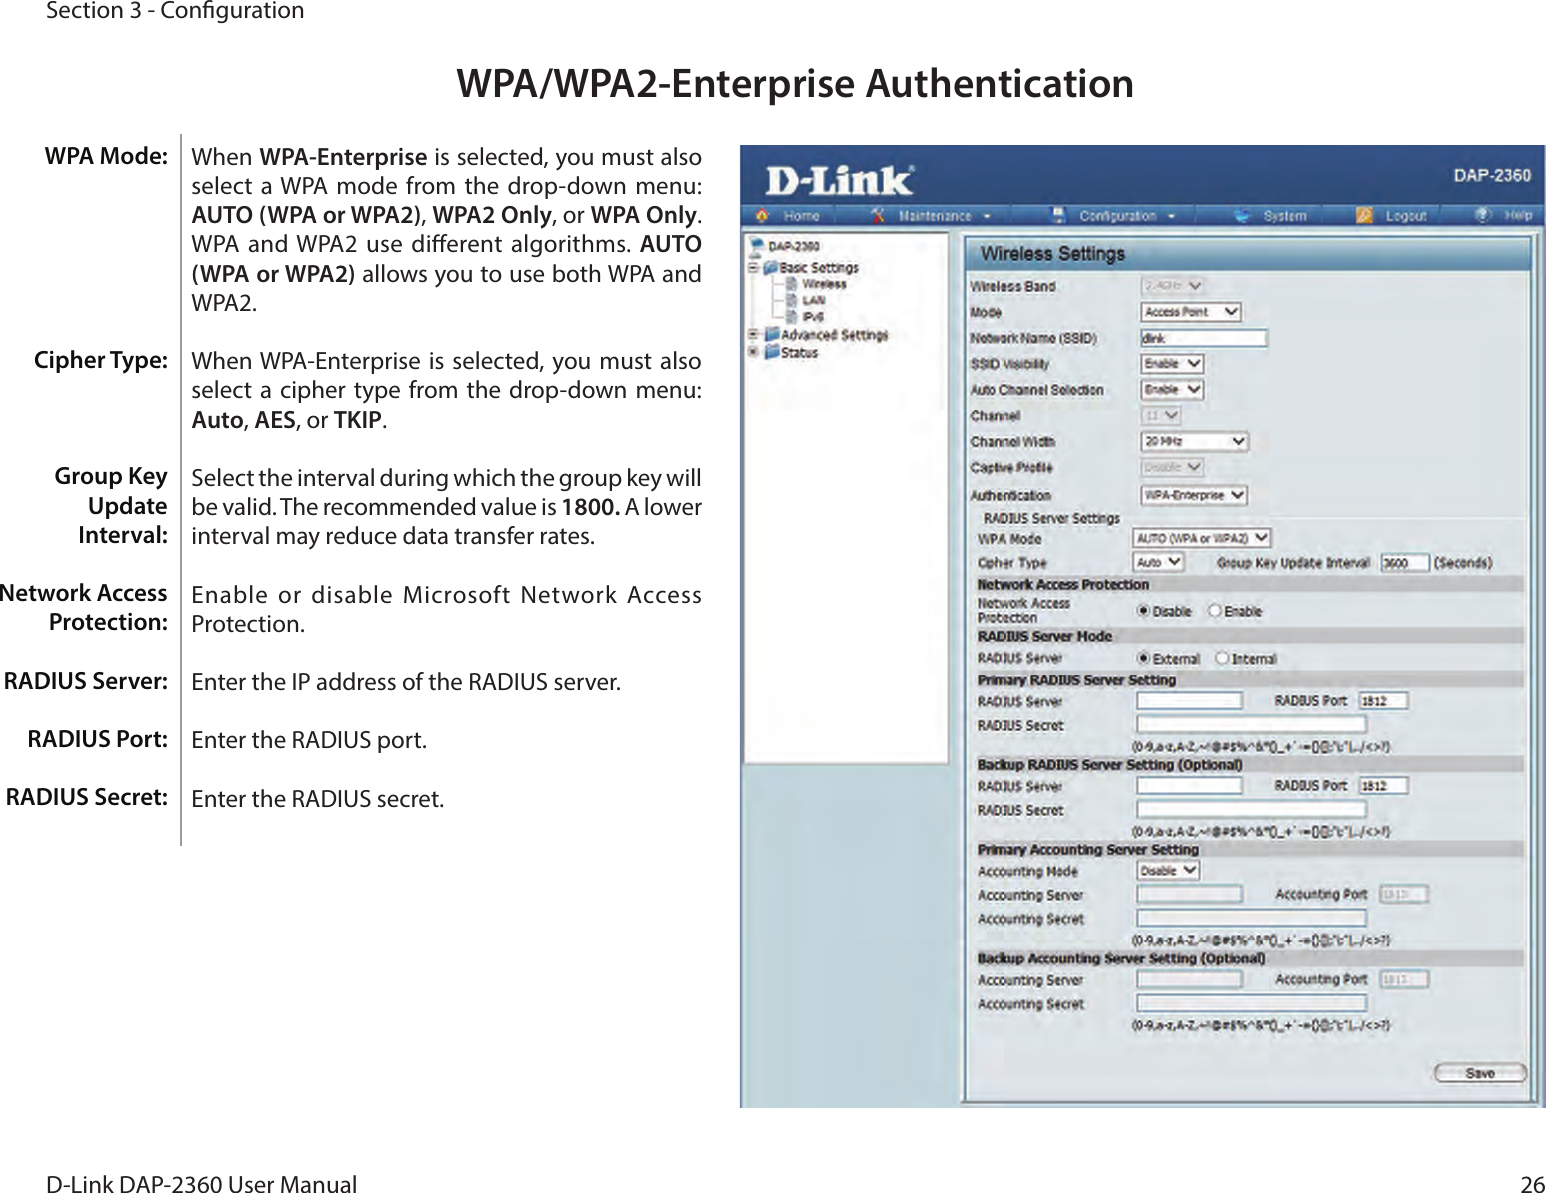 26D-Link DAP-2360 User ManualSection 3 - CongurationWPA/WPA2-Enterprise AuthenticationWhen WPA-Enterprise is selected, you must also select  a WPA mode  from the drop-down menu: AUTO (WPA or WPA2), WPA2 Only, or WPA Only. WPA and WPA2 use dierent algorithms. AUTO (WPA or WPA2) allows you to use both WPA and WPA2. When WPA-Enterprise is selected,  you must also select  a cipher type from the  drop-down menu: Auto, AES, or TKIP.Select the interval during which the group key will be valid. The recommended value is 1800. A lower interval may reduce data transfer rates.Enable or disable Microsoft Network Access Protection.Enter the IP address of the RADIUS server.Enter the RADIUS port.Enter the RADIUS secret.WPA Mode: Cipher Type:Group Key Update Interval:Network Access Protection:RADIUS Server:RADIUS Port:RADIUS Secret: